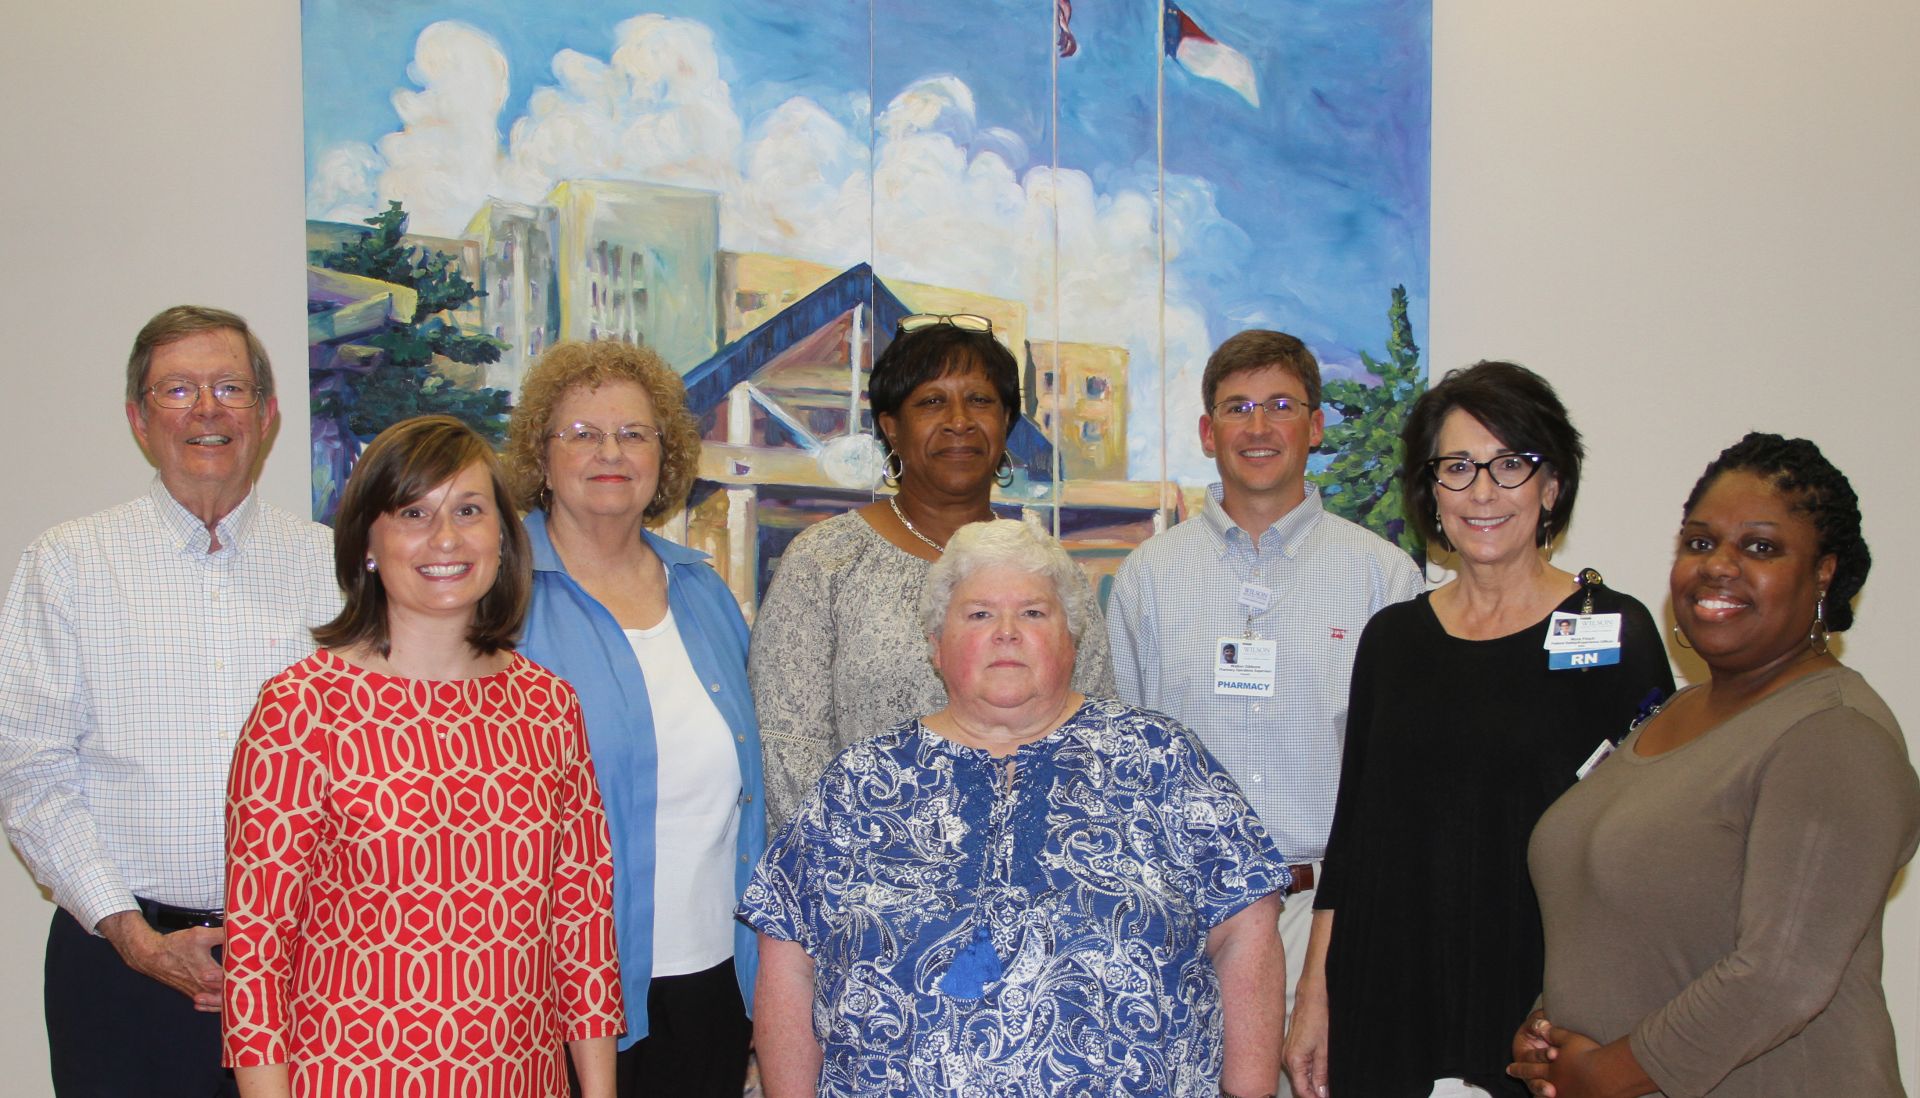 Pictured from left are Patrick Burch, Dana Etheridge, Paula Wright, Cynthia Powell,  Evelyn Baskervill, Walton Gibbons, Nora Finch and Danielle Vick;